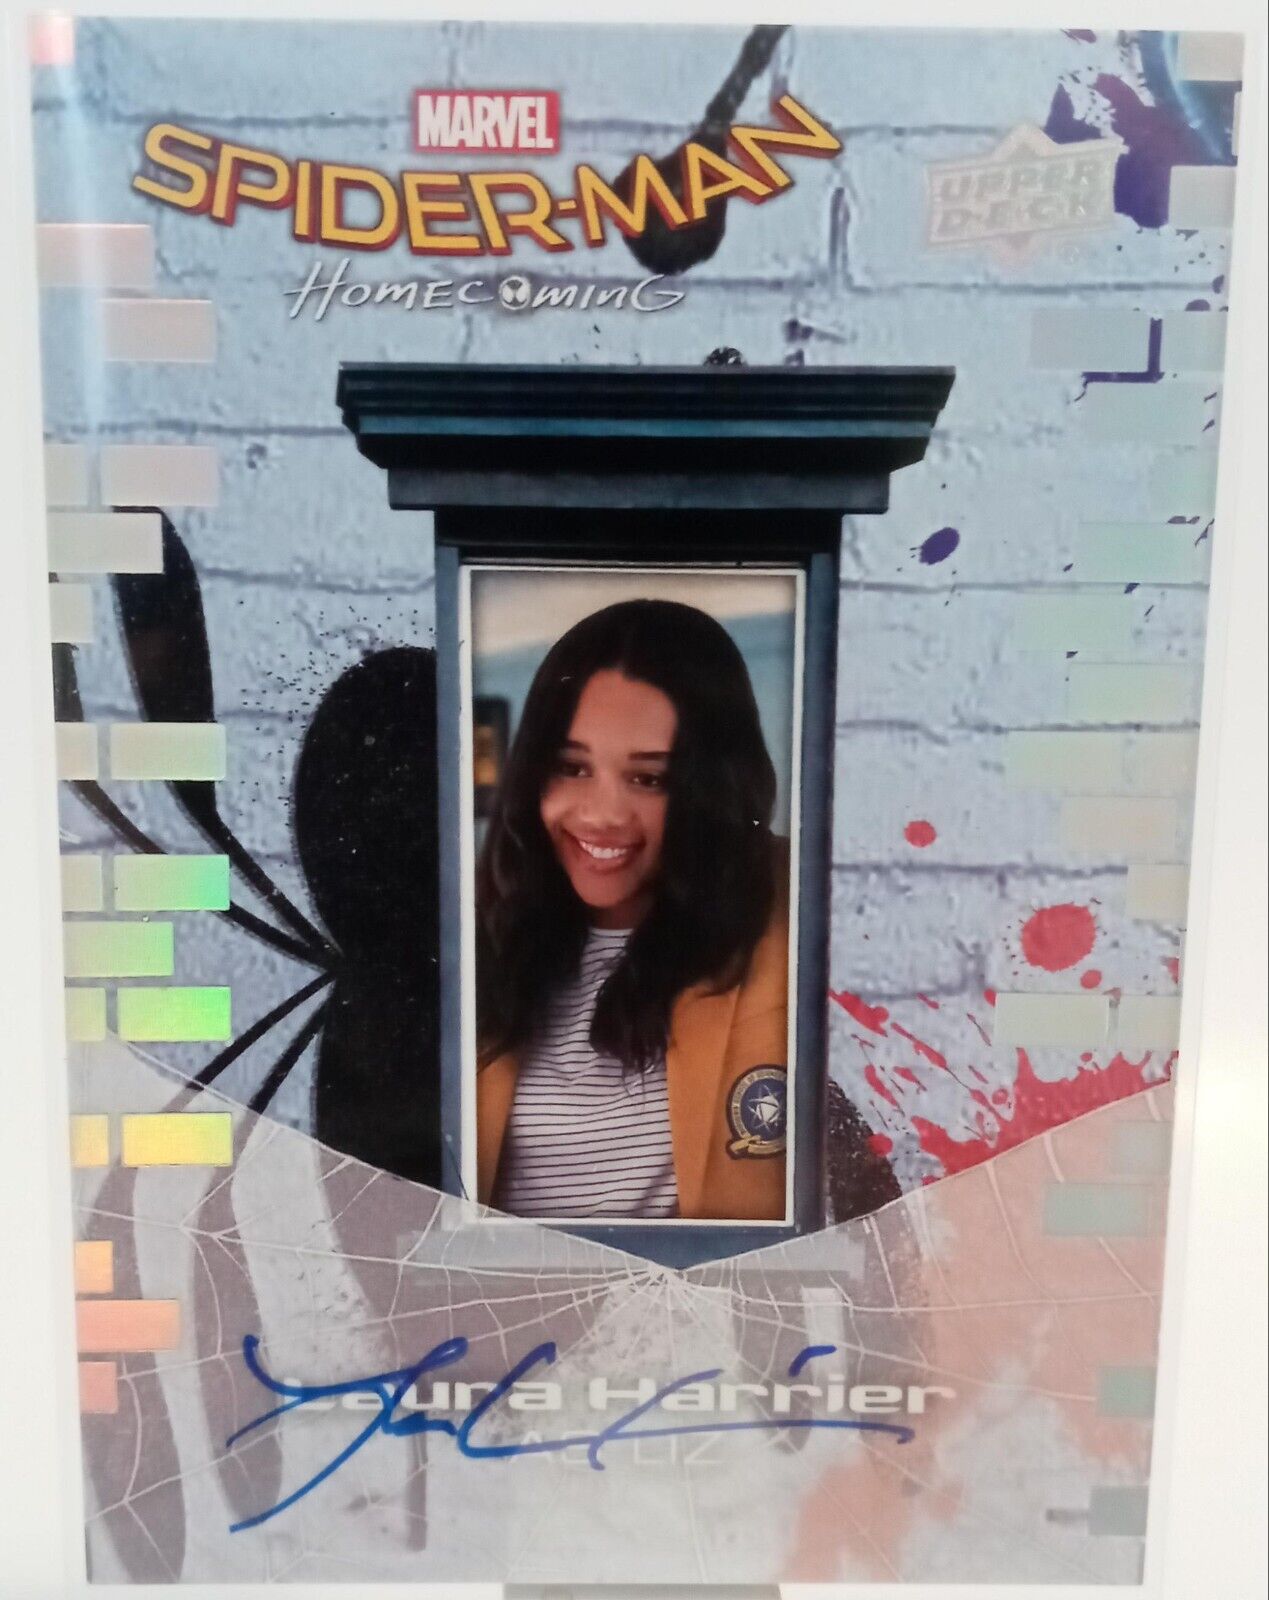 2017 UD Marvel Spiderman Homecoming Autographed By Laura Harrier